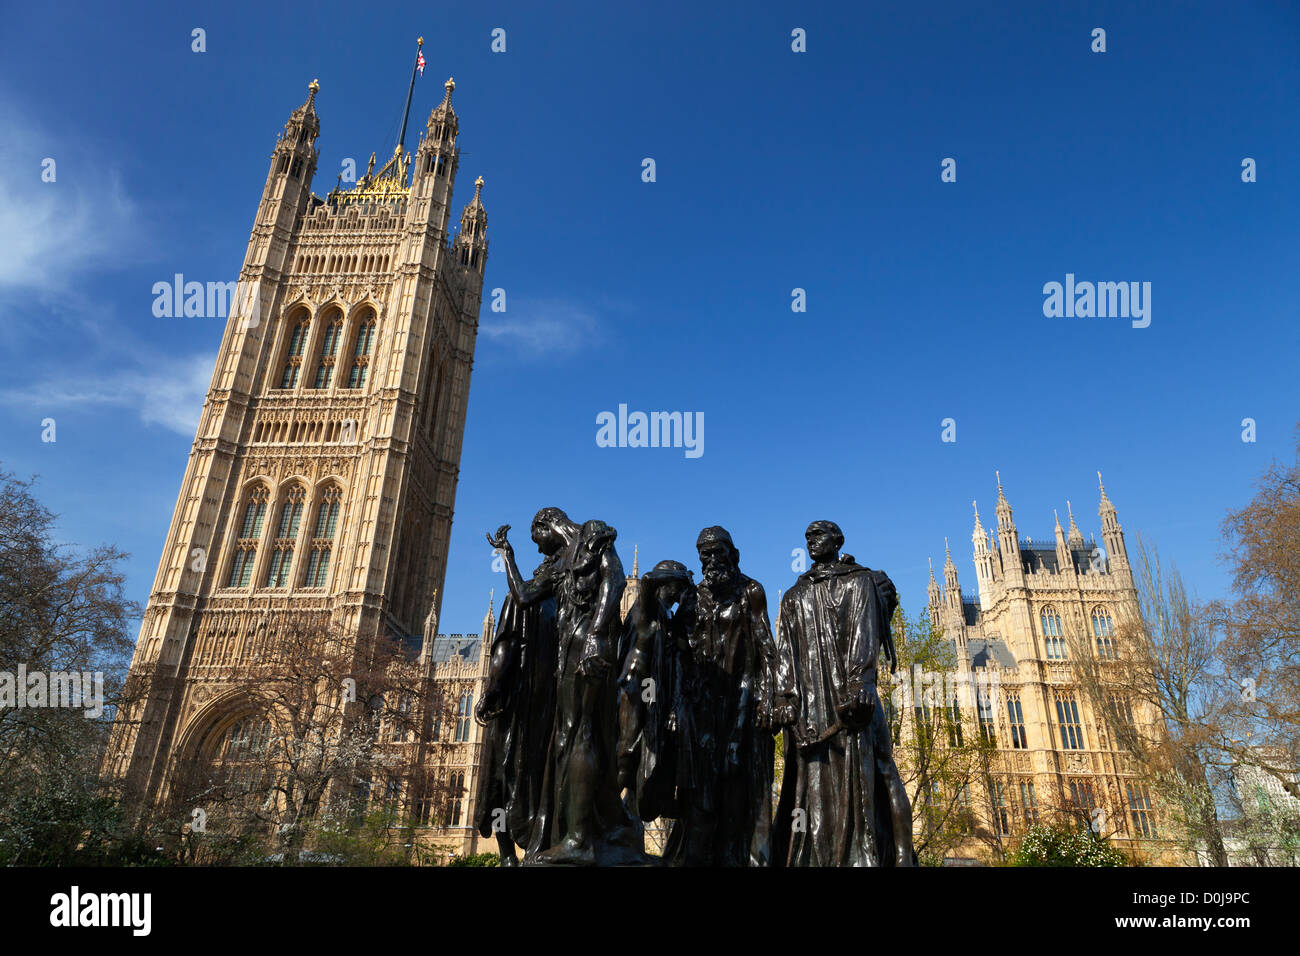 Rodin's Burghers of Calais in Victoria Tower Gardens in London. Stock Photo